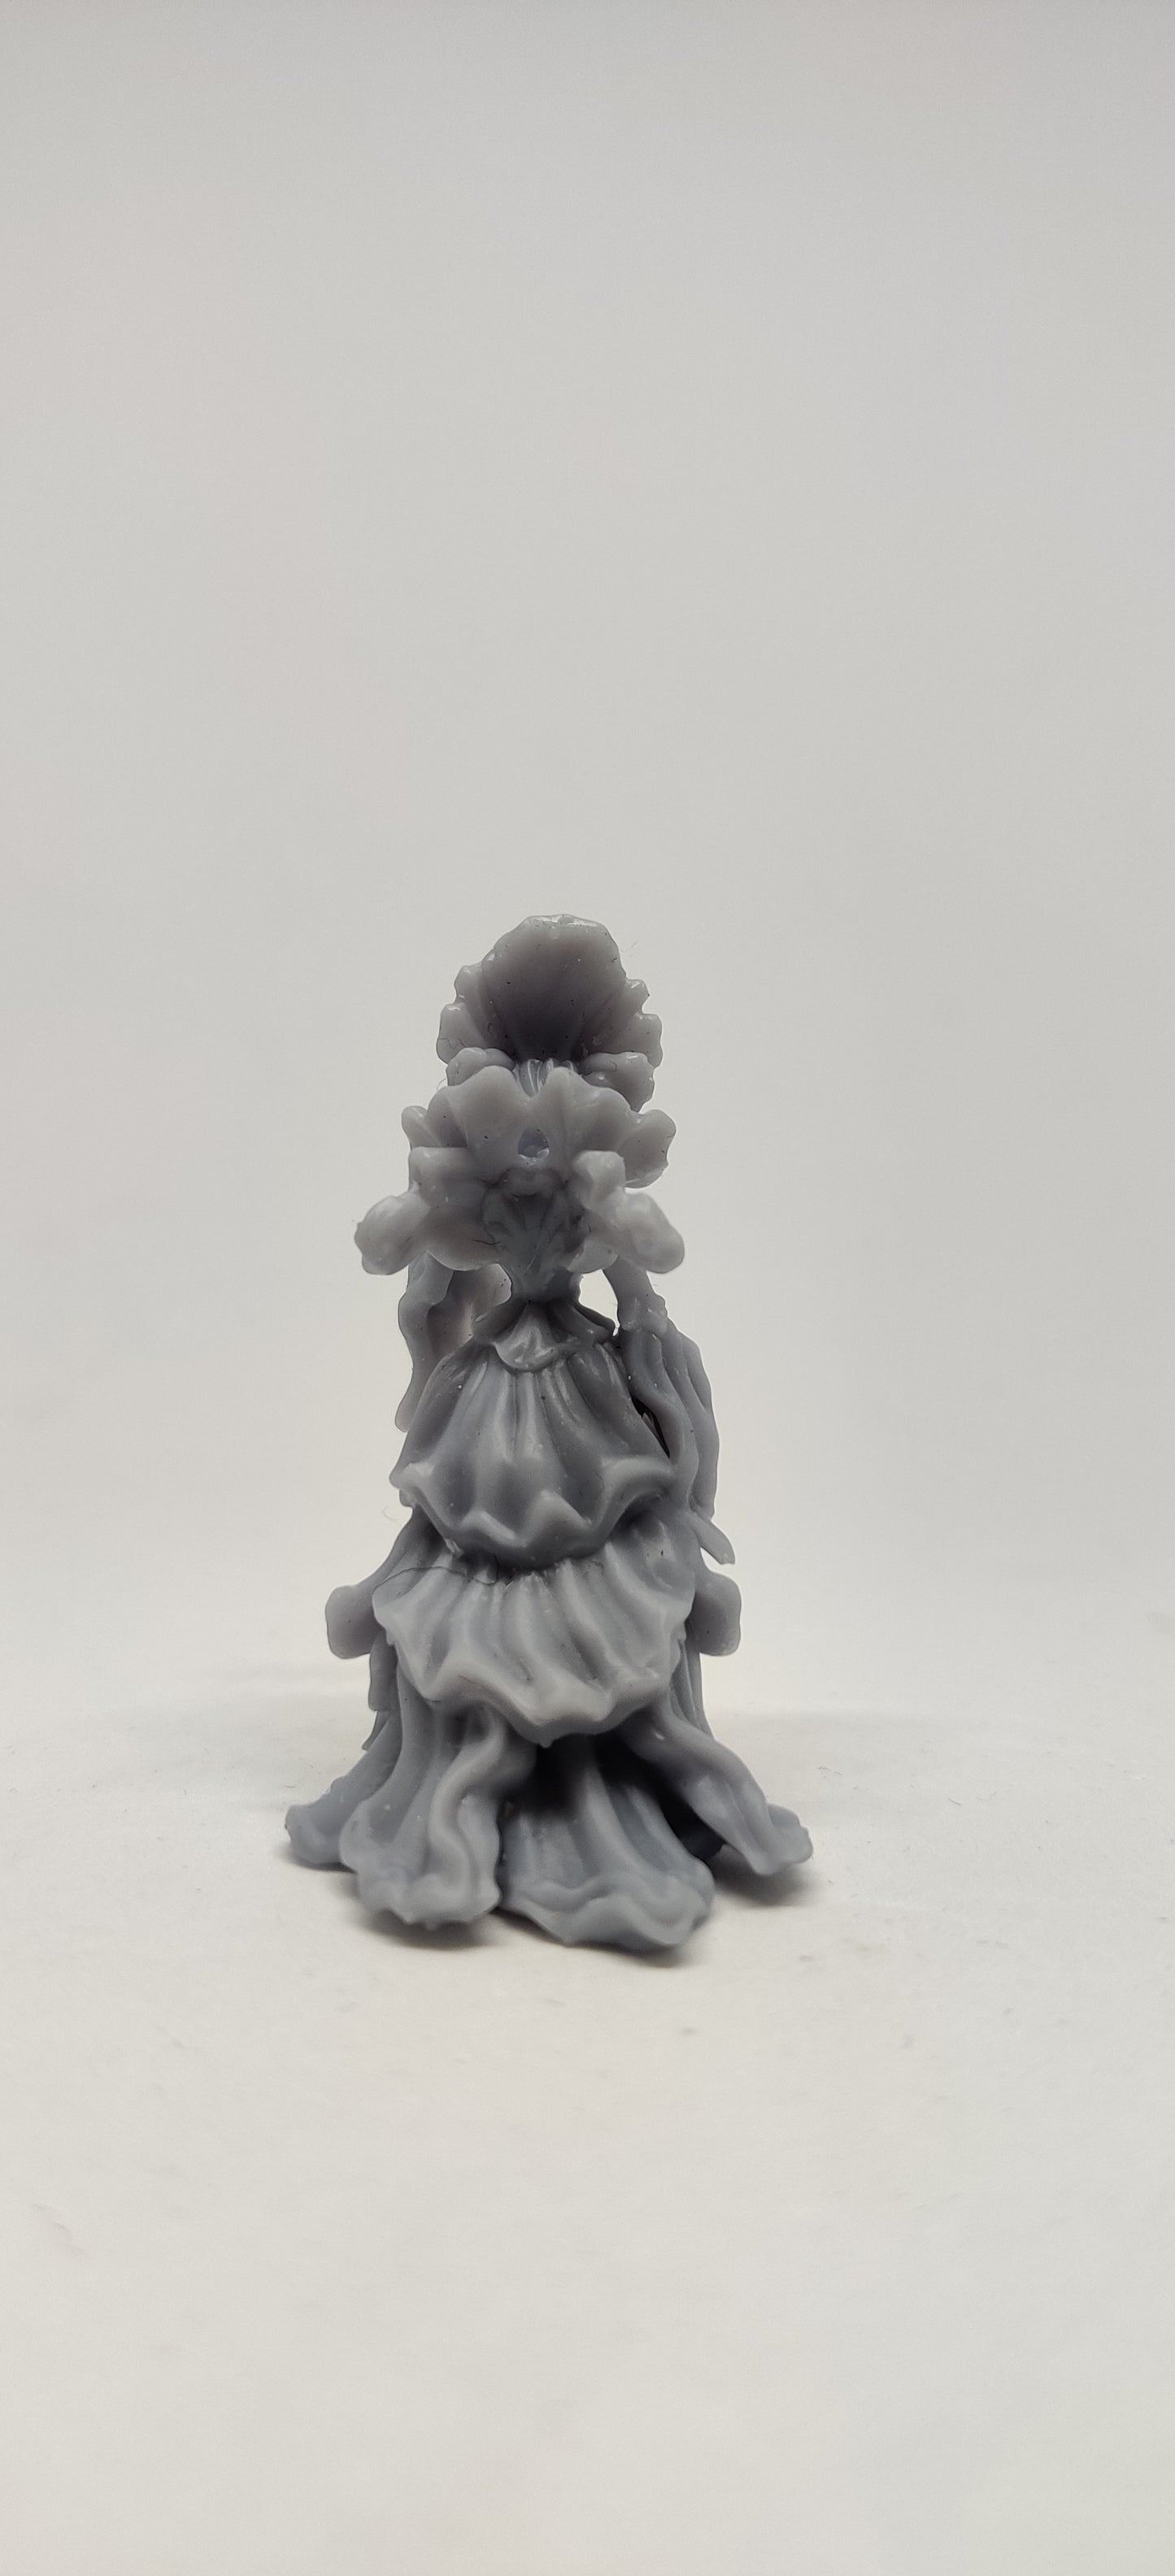 3d printed Asura, arch fey of the bloom mini